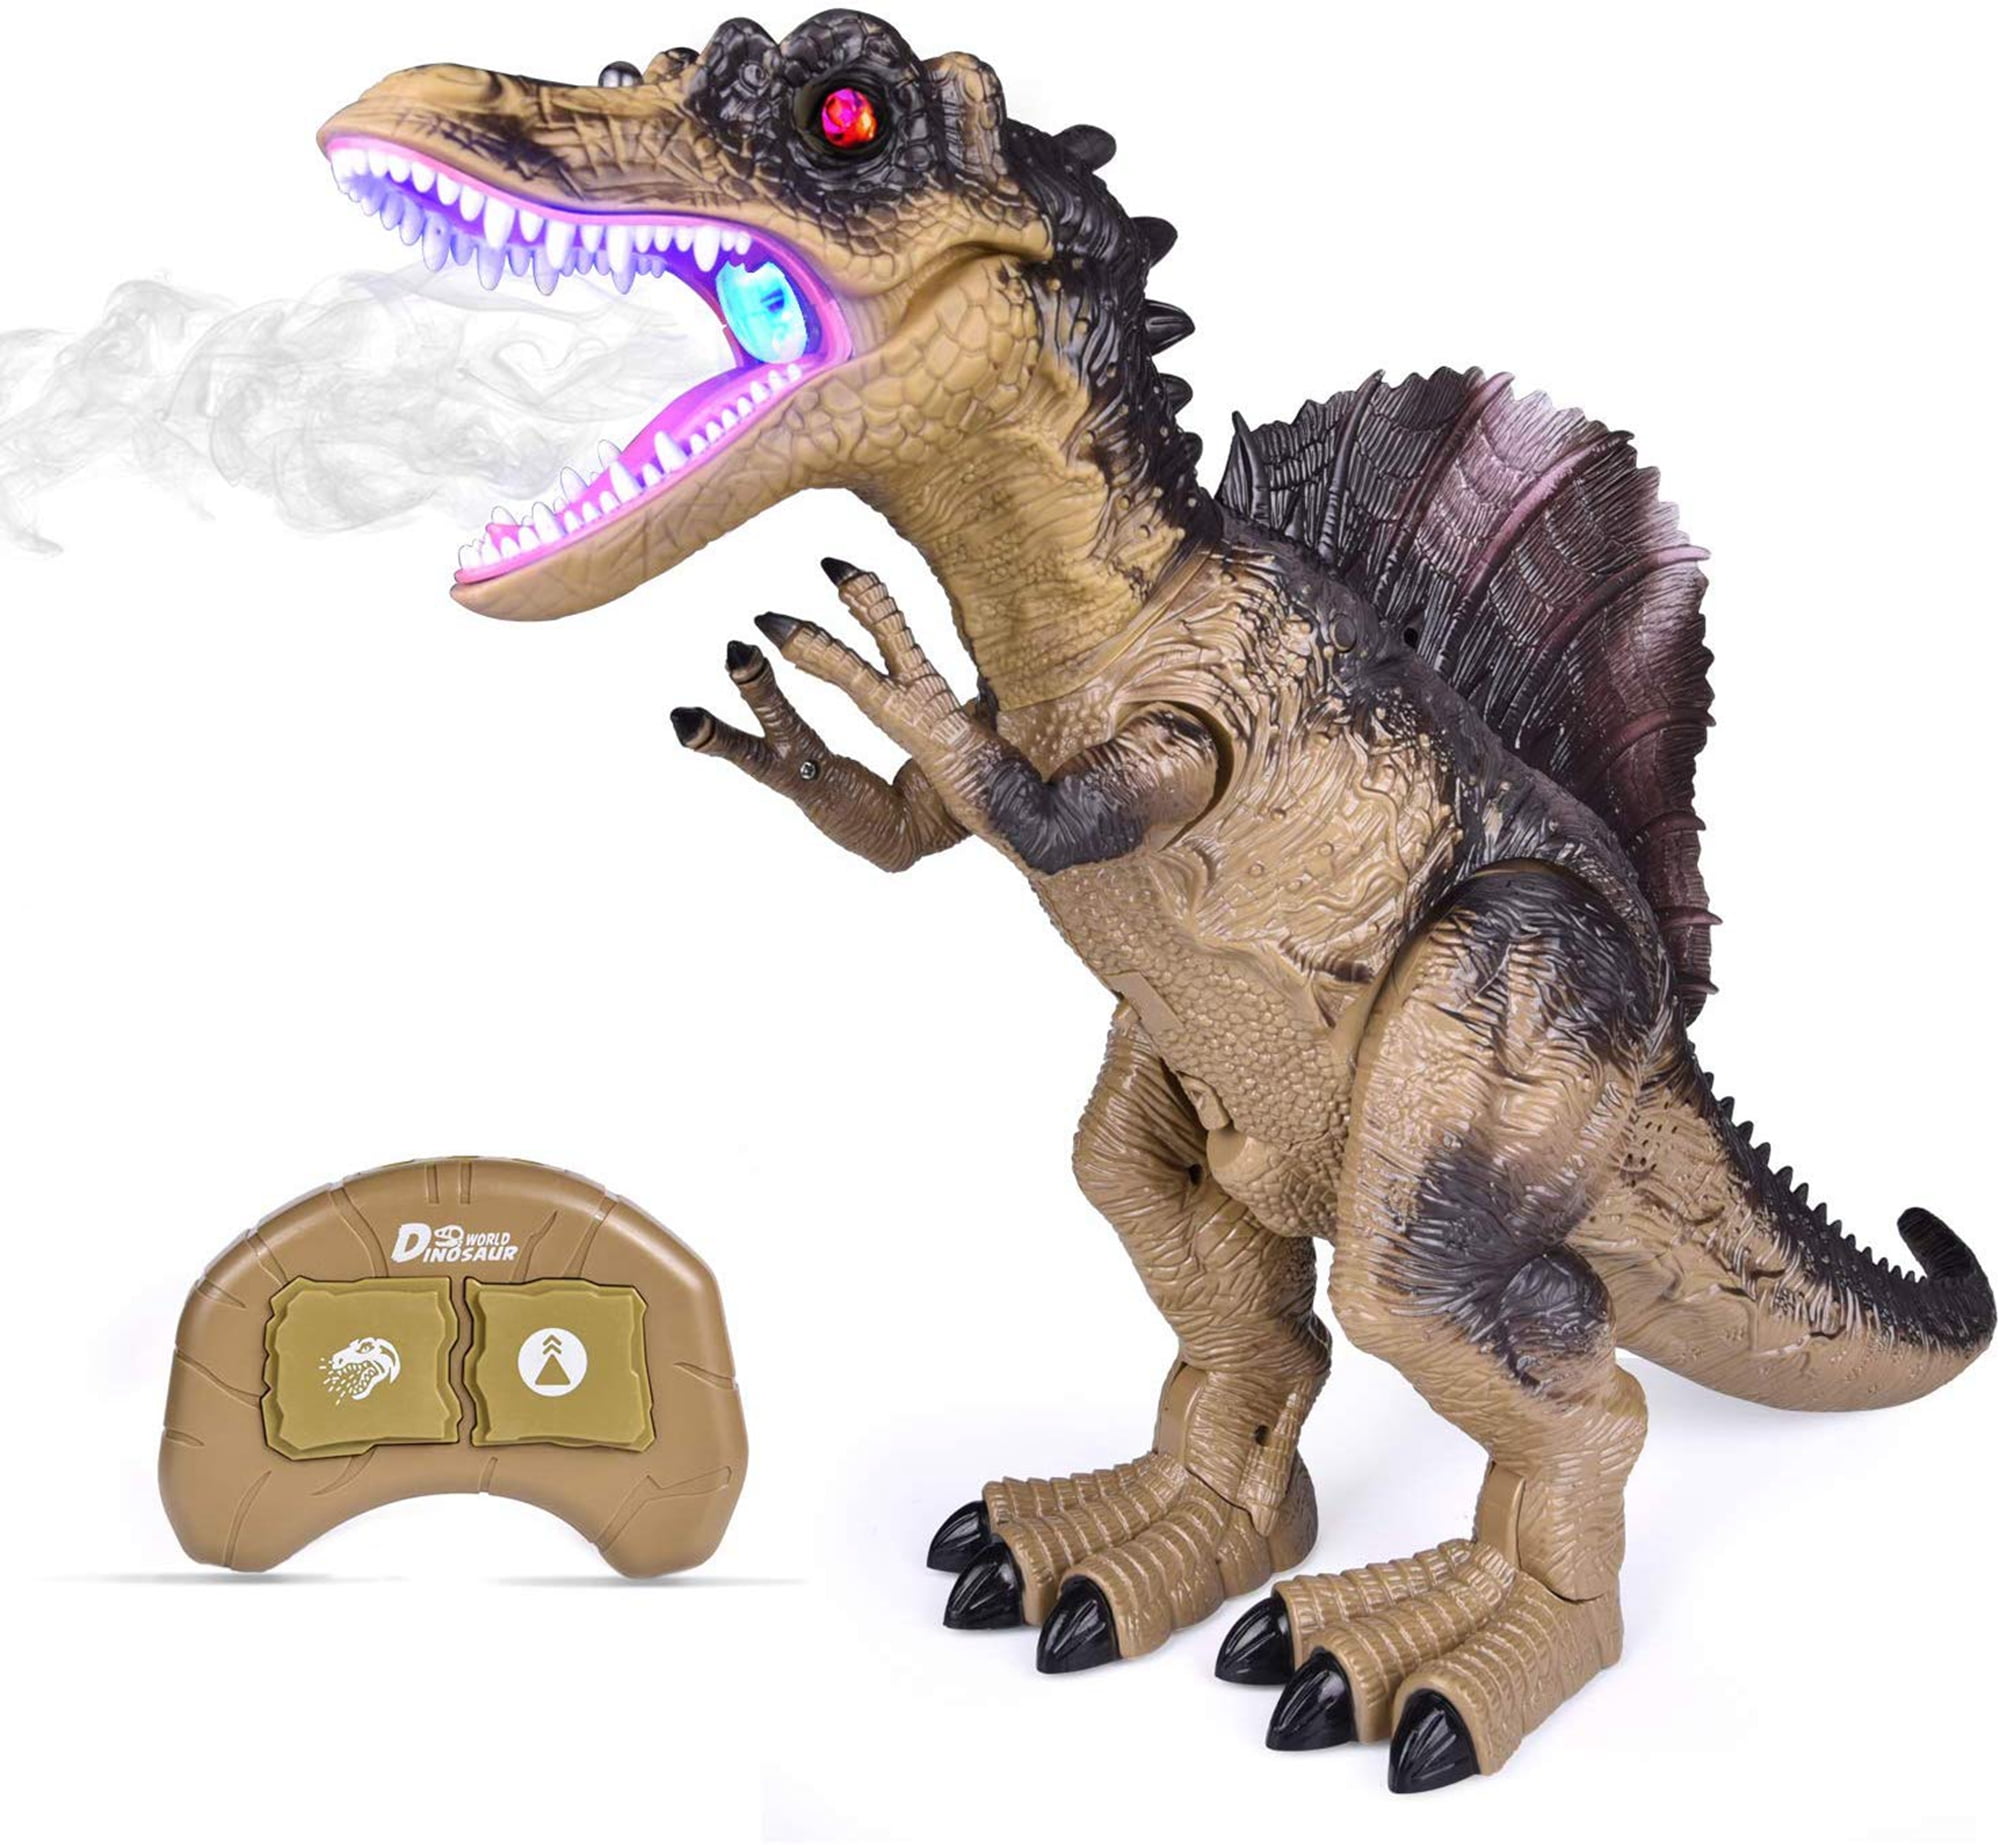 Walking Movement JOYIN LED Light Up Remote Control Dinosaur Walking and Roaring Realistic T-Rex Dinosaur Toys with Glowing Eyes Shaking Head For Toddlers Boys Girls 